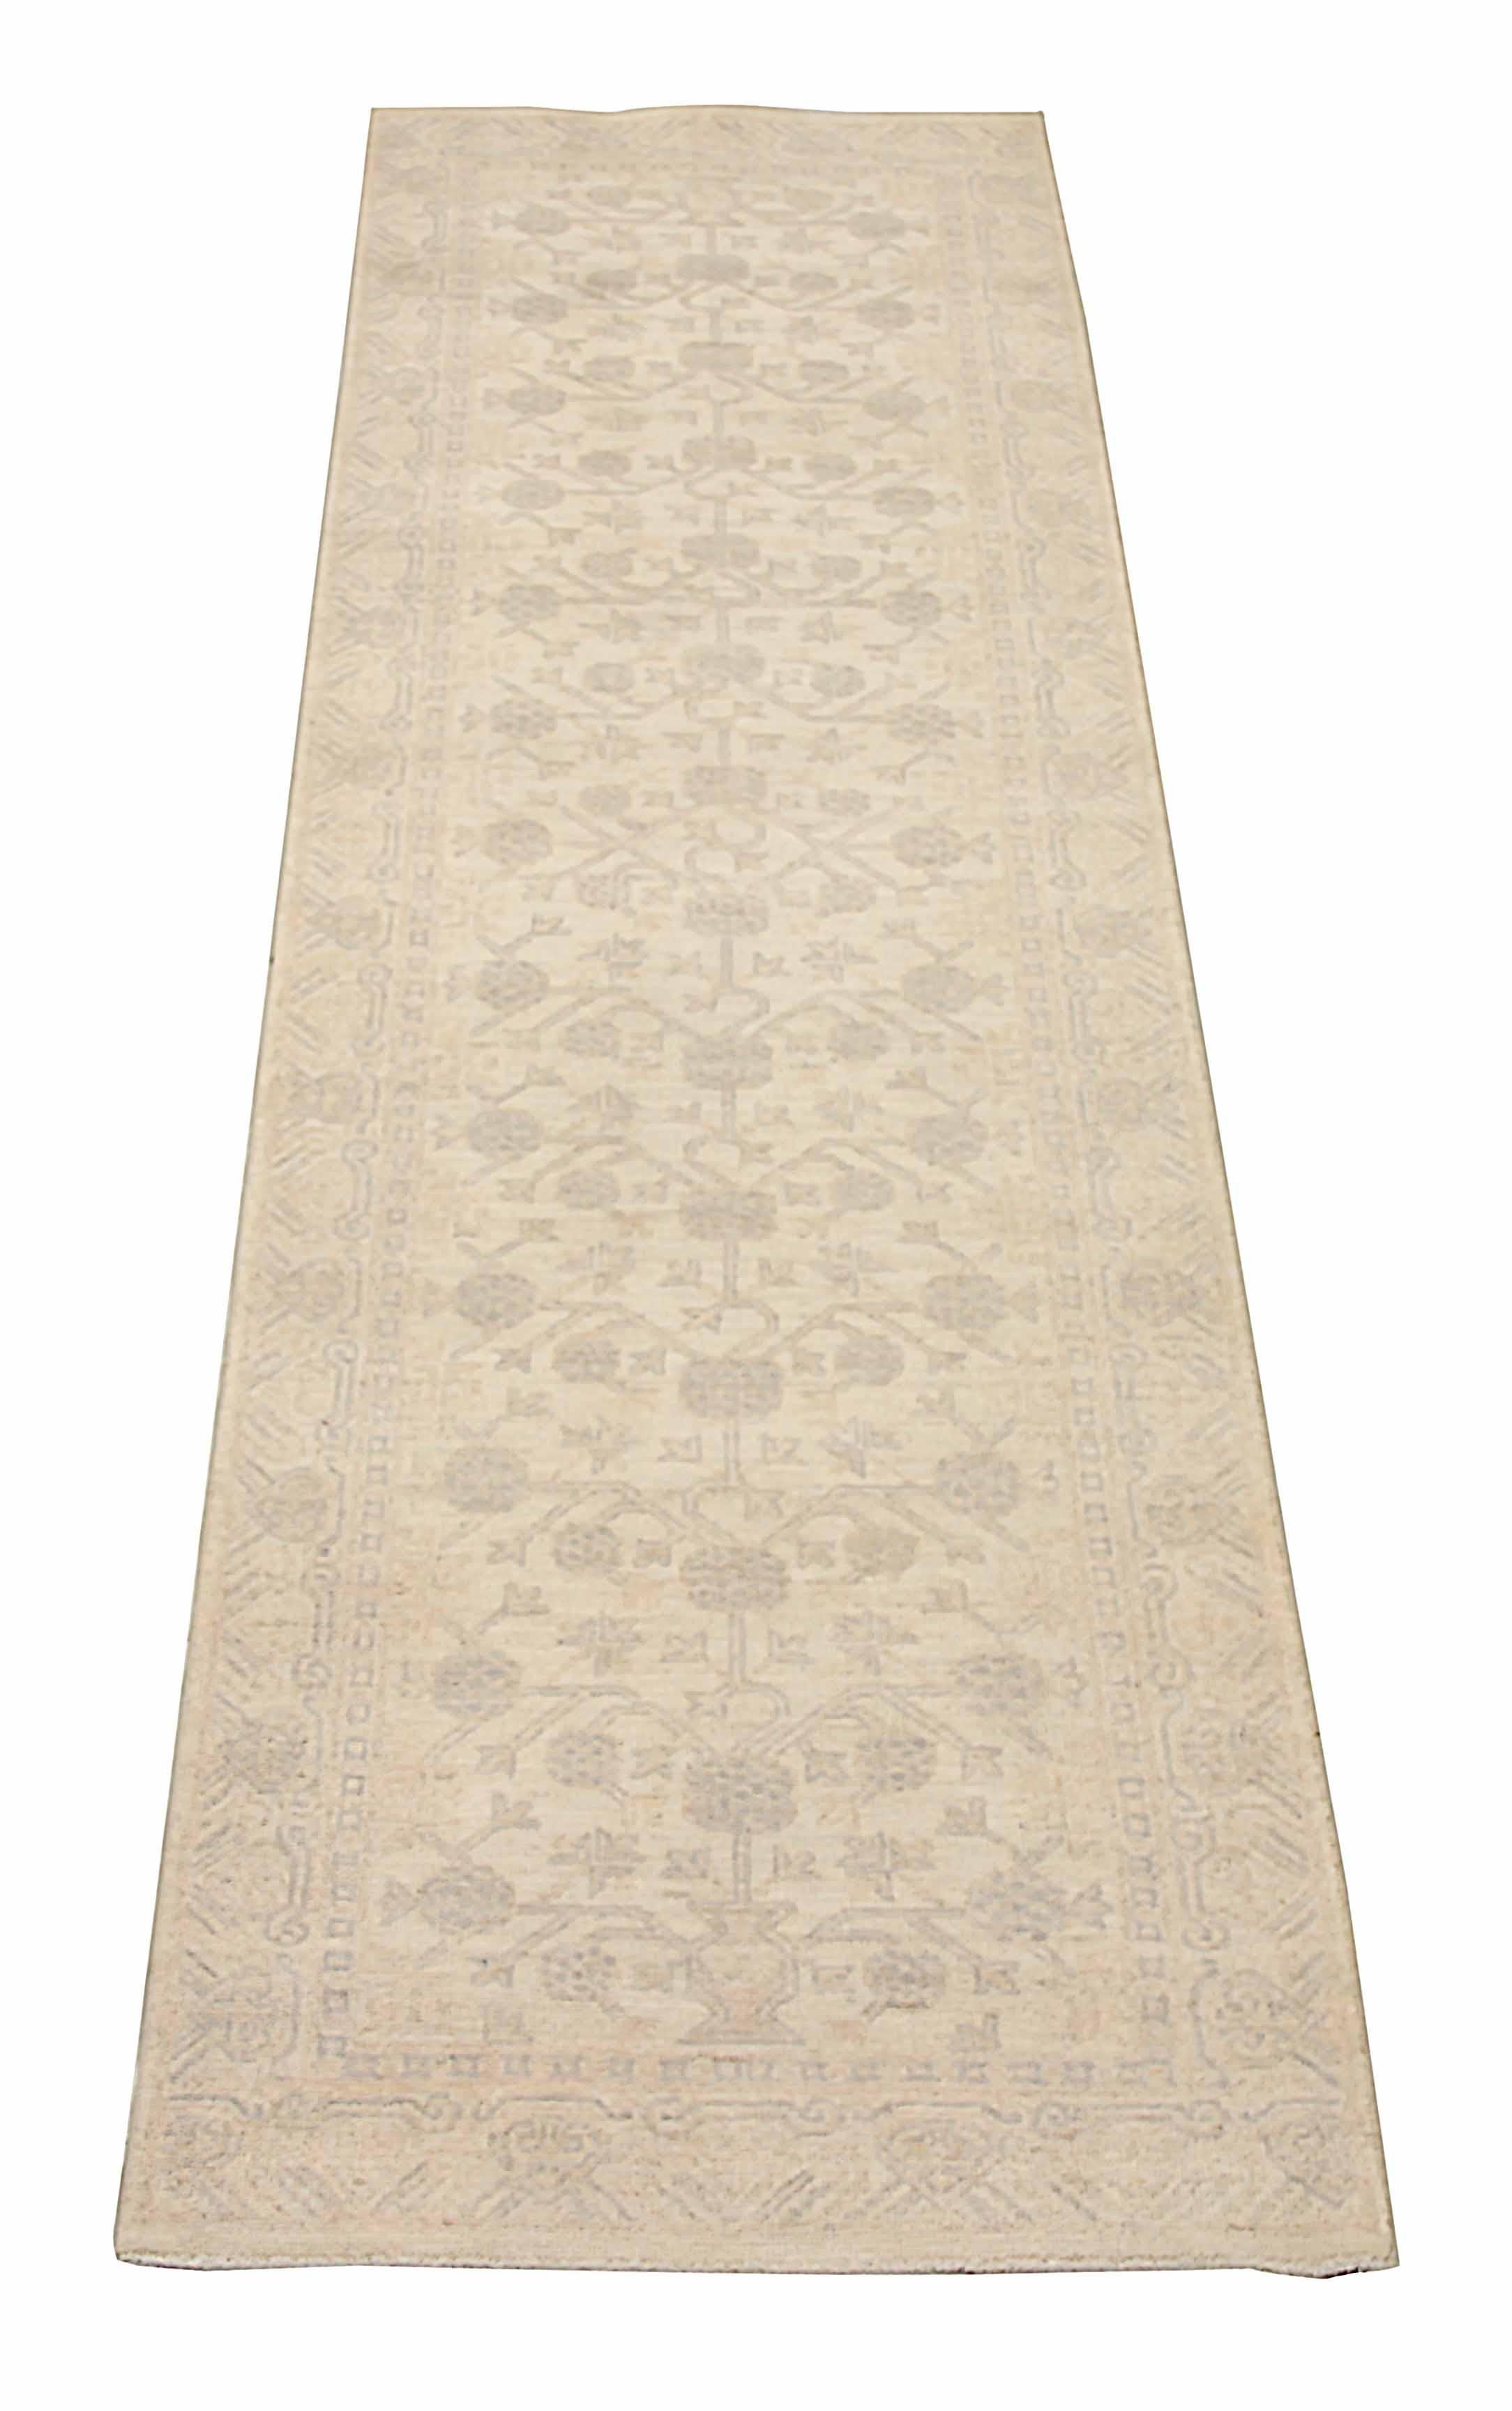 New Afghan runner rug handwoven from the finest sheep’s wool. It’s colored with all-natural vegetable dyes that are safe for humans and pets. It’s a traditional Khotan design woven by expert artisans. In addition to the fine weaving, this rug